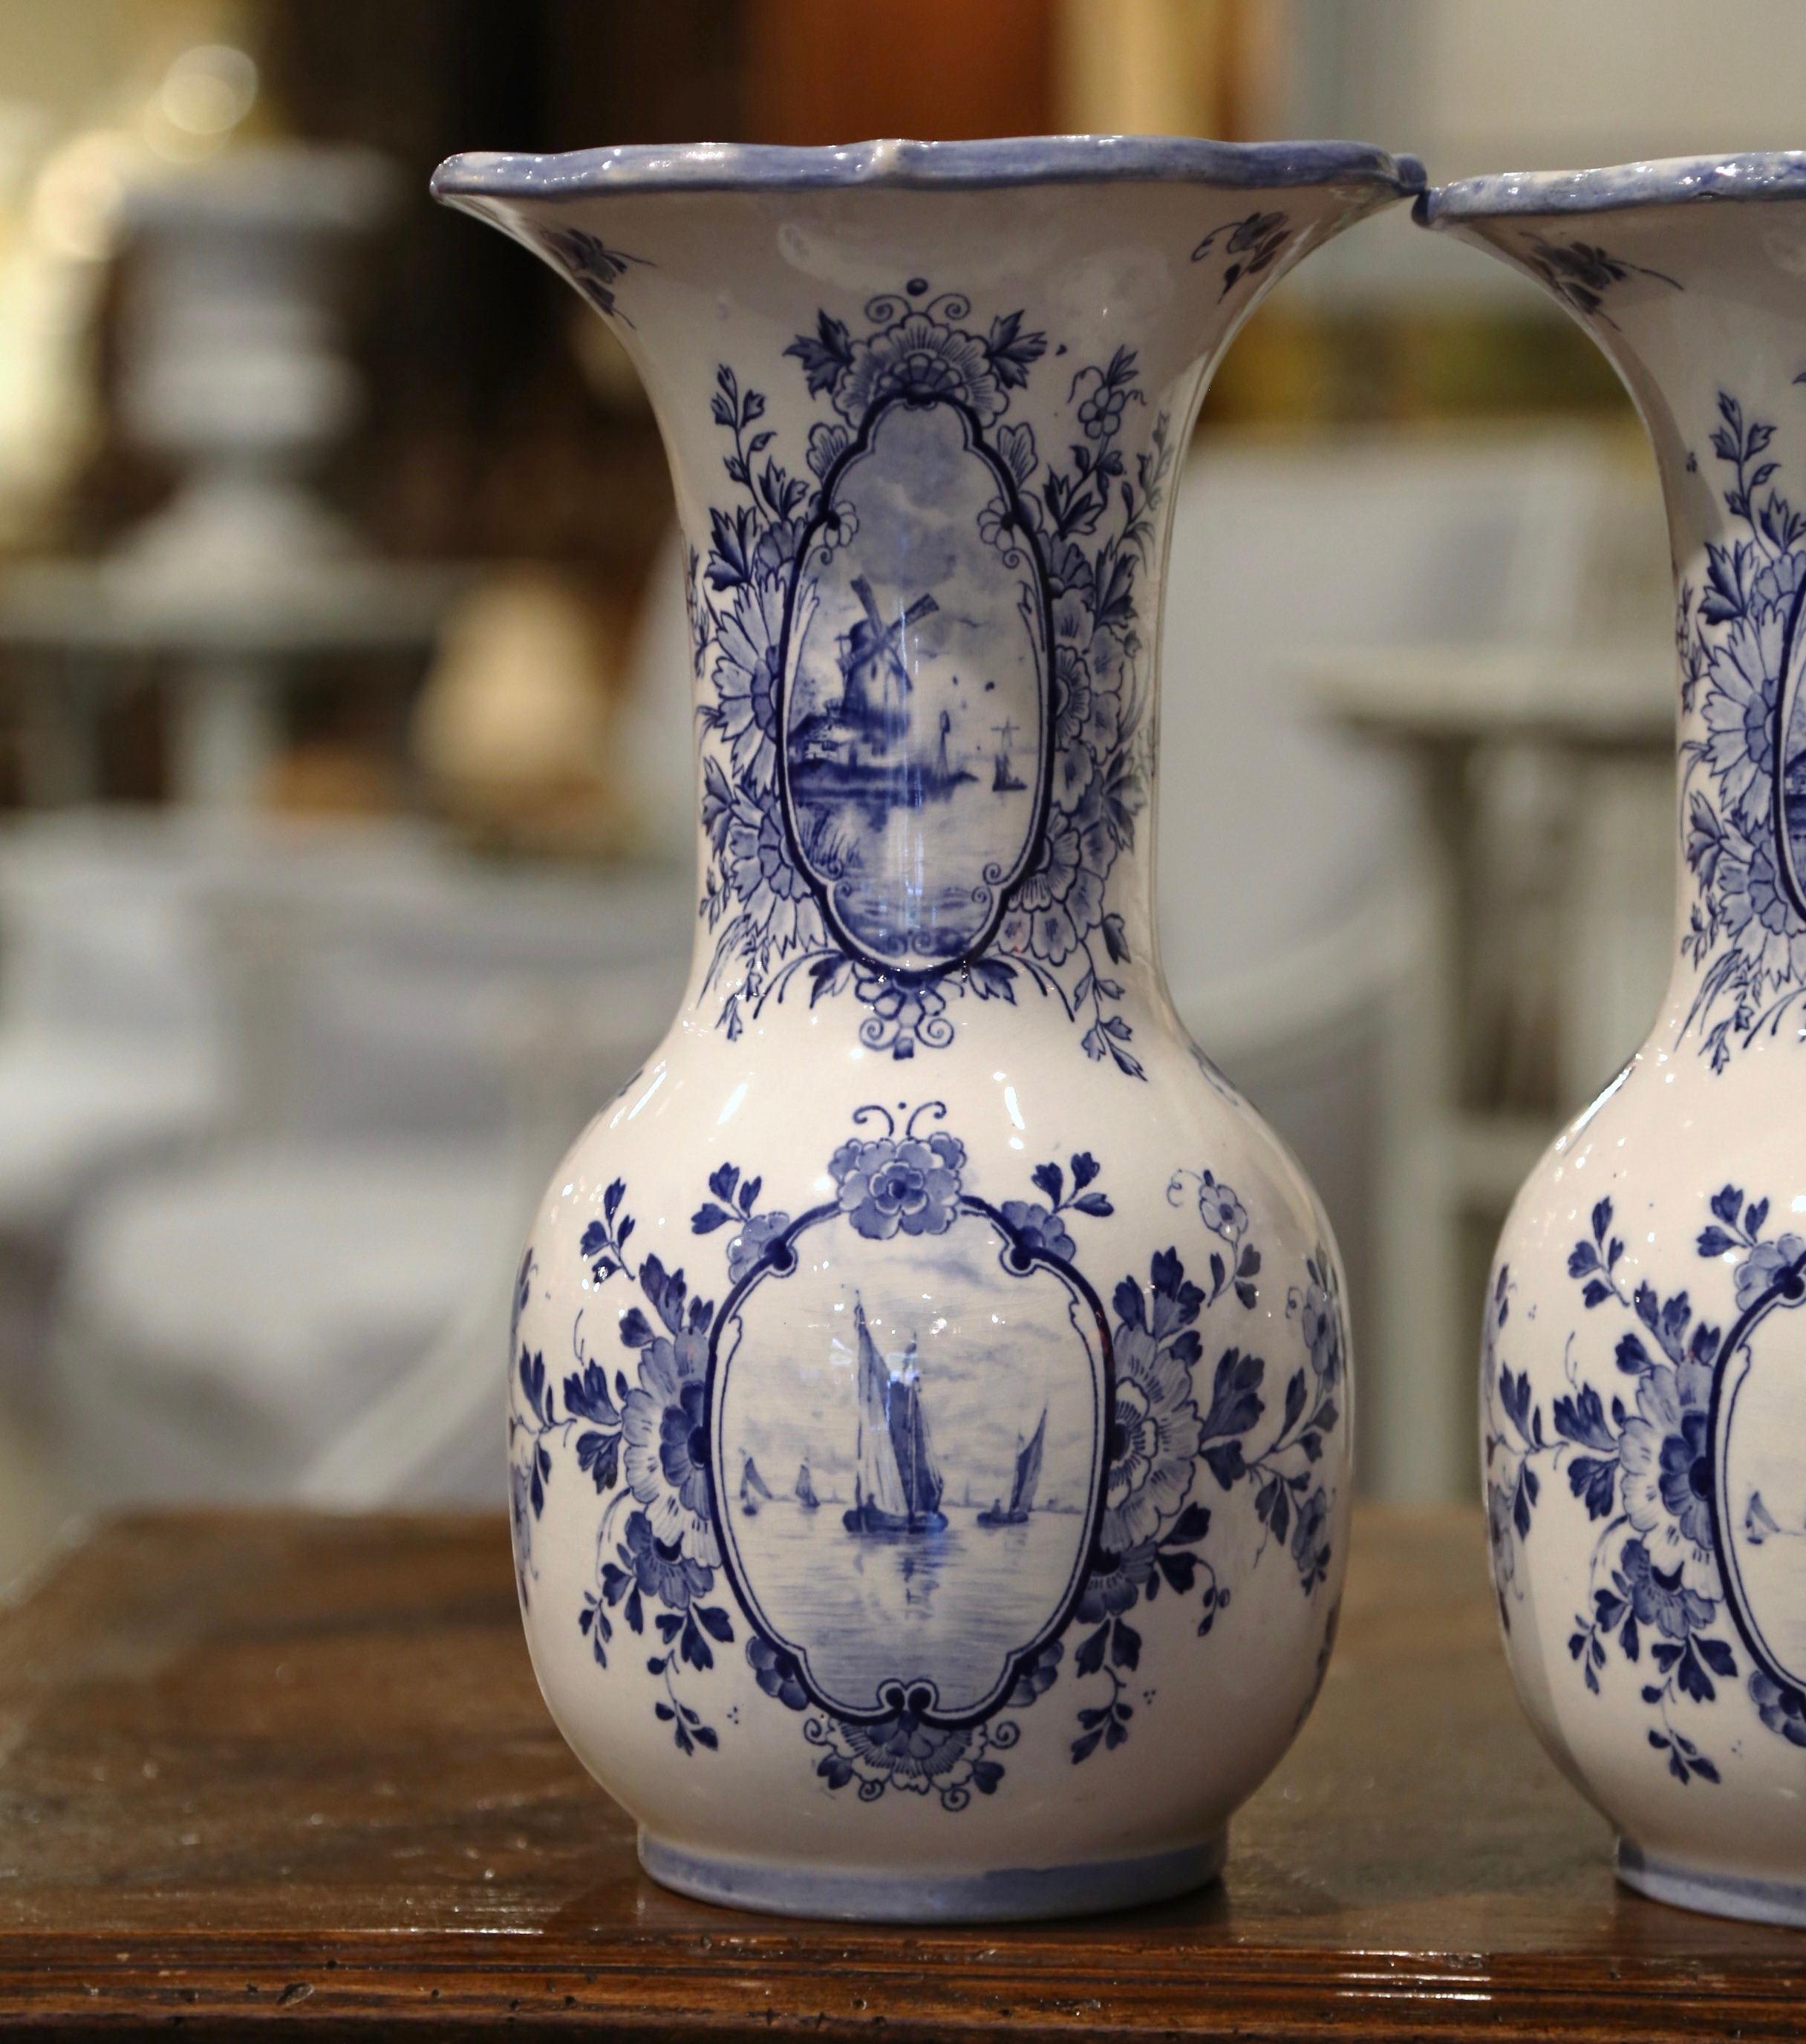 20th Century Mid-Century Dutch Blue and White Hand-Painted Faience Delft Vases, Set of 3